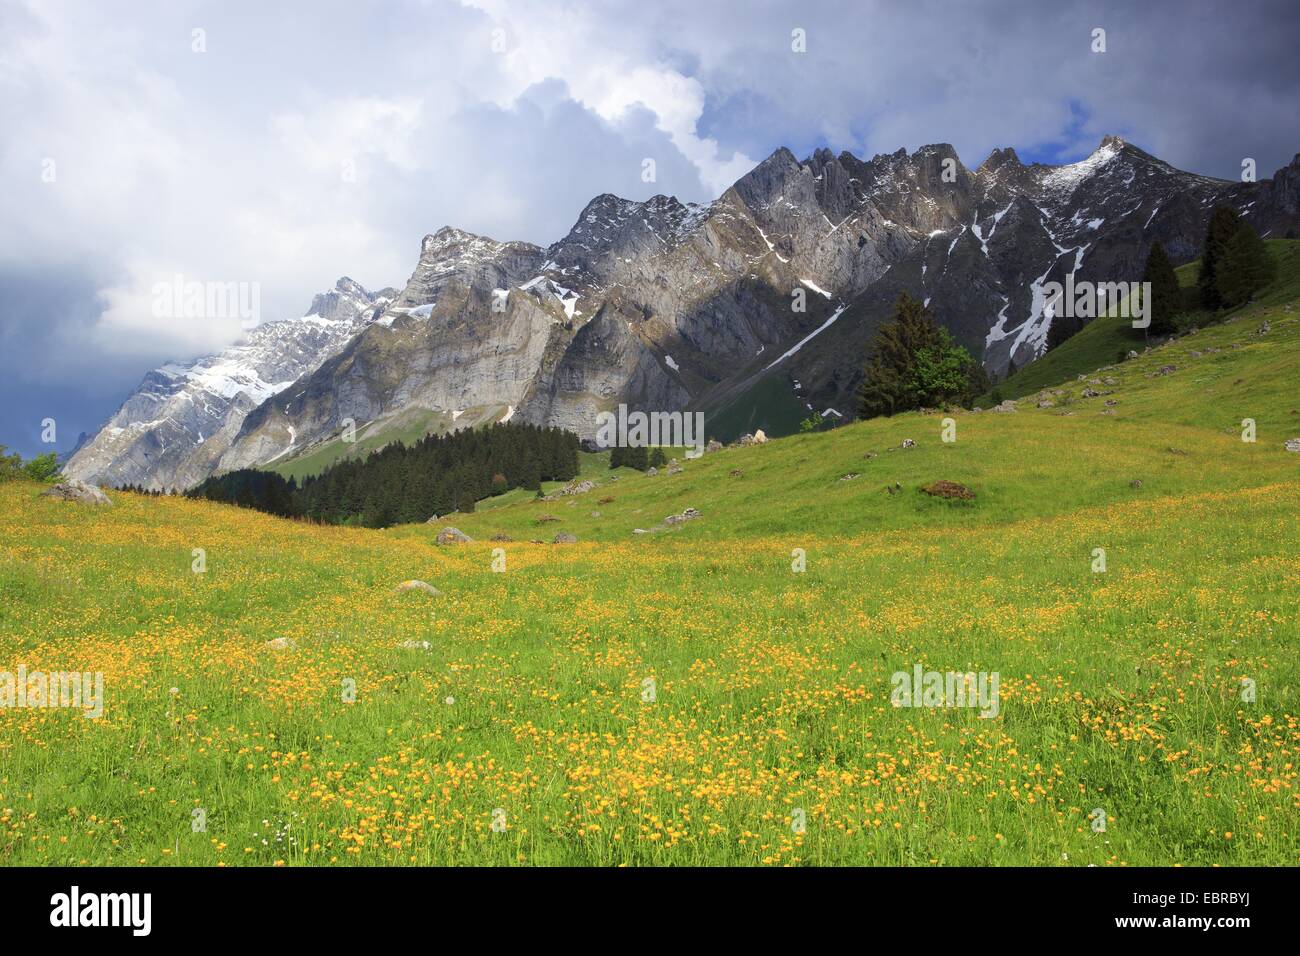 aconite-leaf buttercup (Ranunculus aconitifolius), view from a mountain meadow at the Alpstein massif with the highest mountain Saentis (2502 m), Switzerland Stock Photo